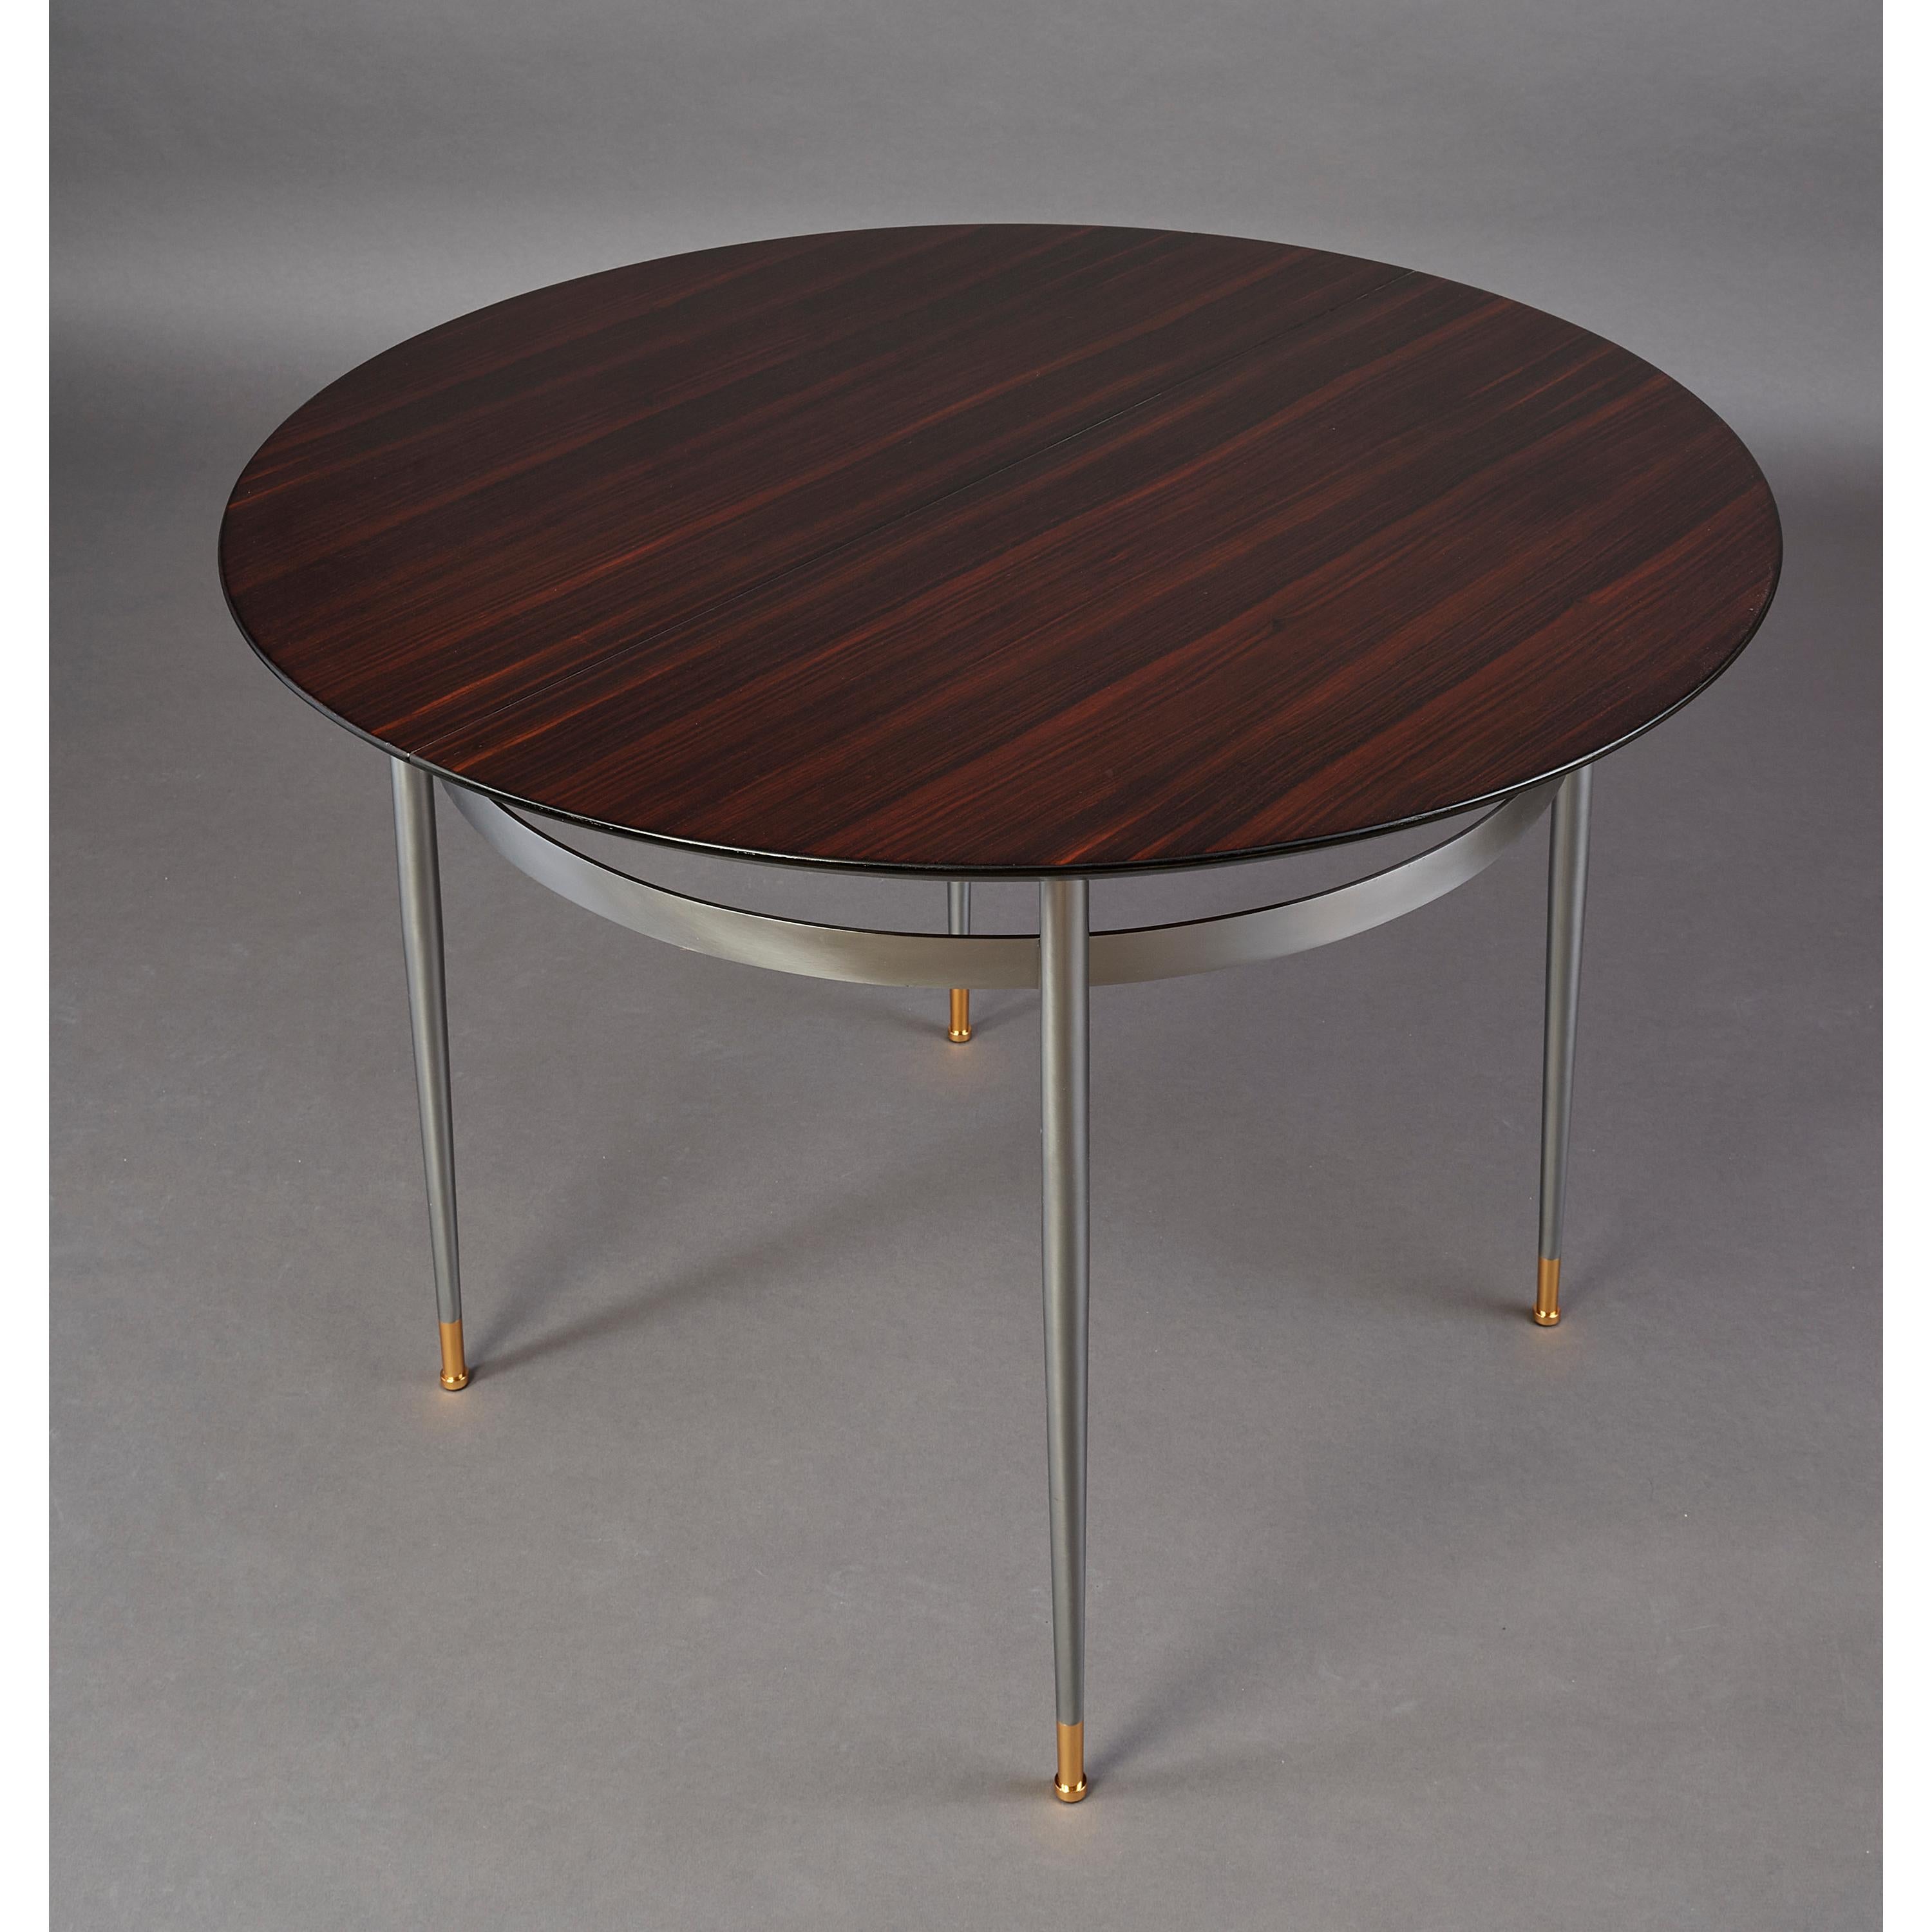 LOUIS SOGNOT (1892-1970) Edited by Maurice RINCK
An exceptional Modernist extendable center or dining table in Macassar Ebony, with tapered steel legs ending in polished bronze sabots. The table extends to become an exquisite oval table with one